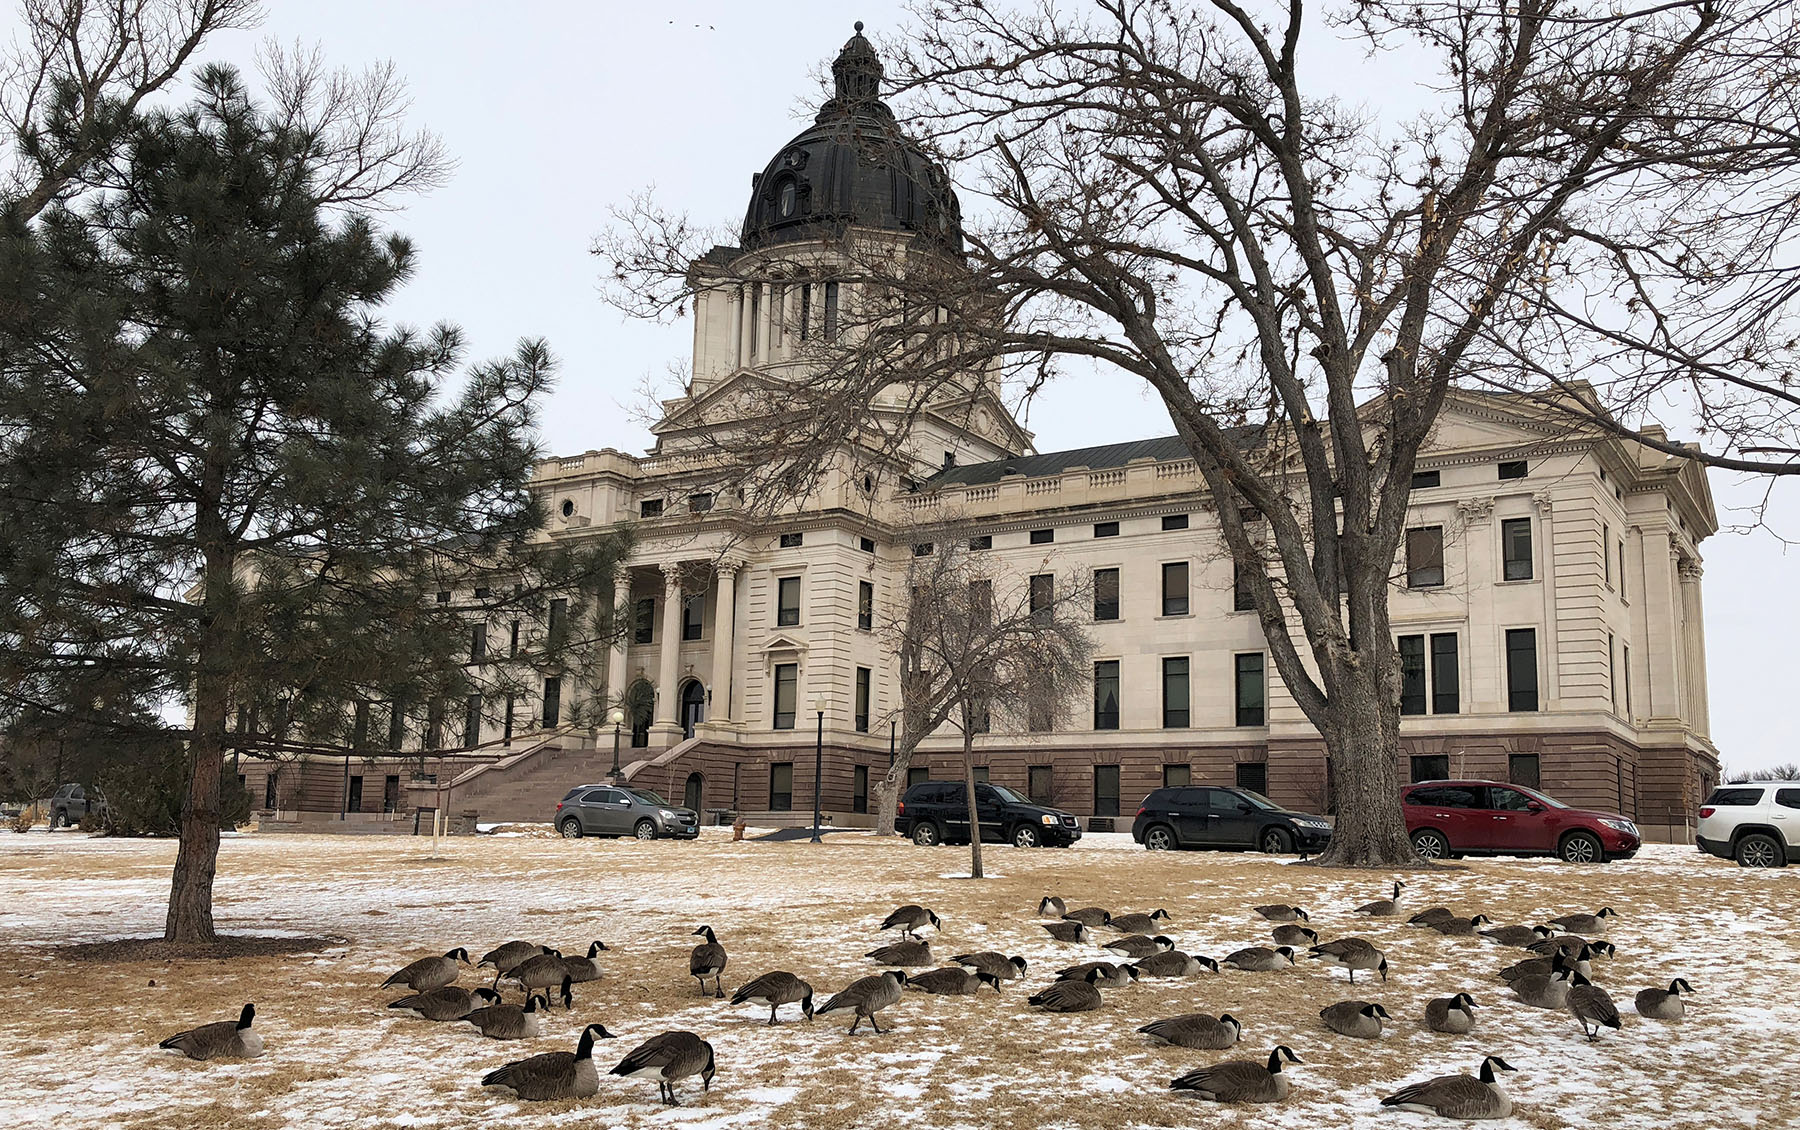 The South Dakota state capitol building is seen in Pierre